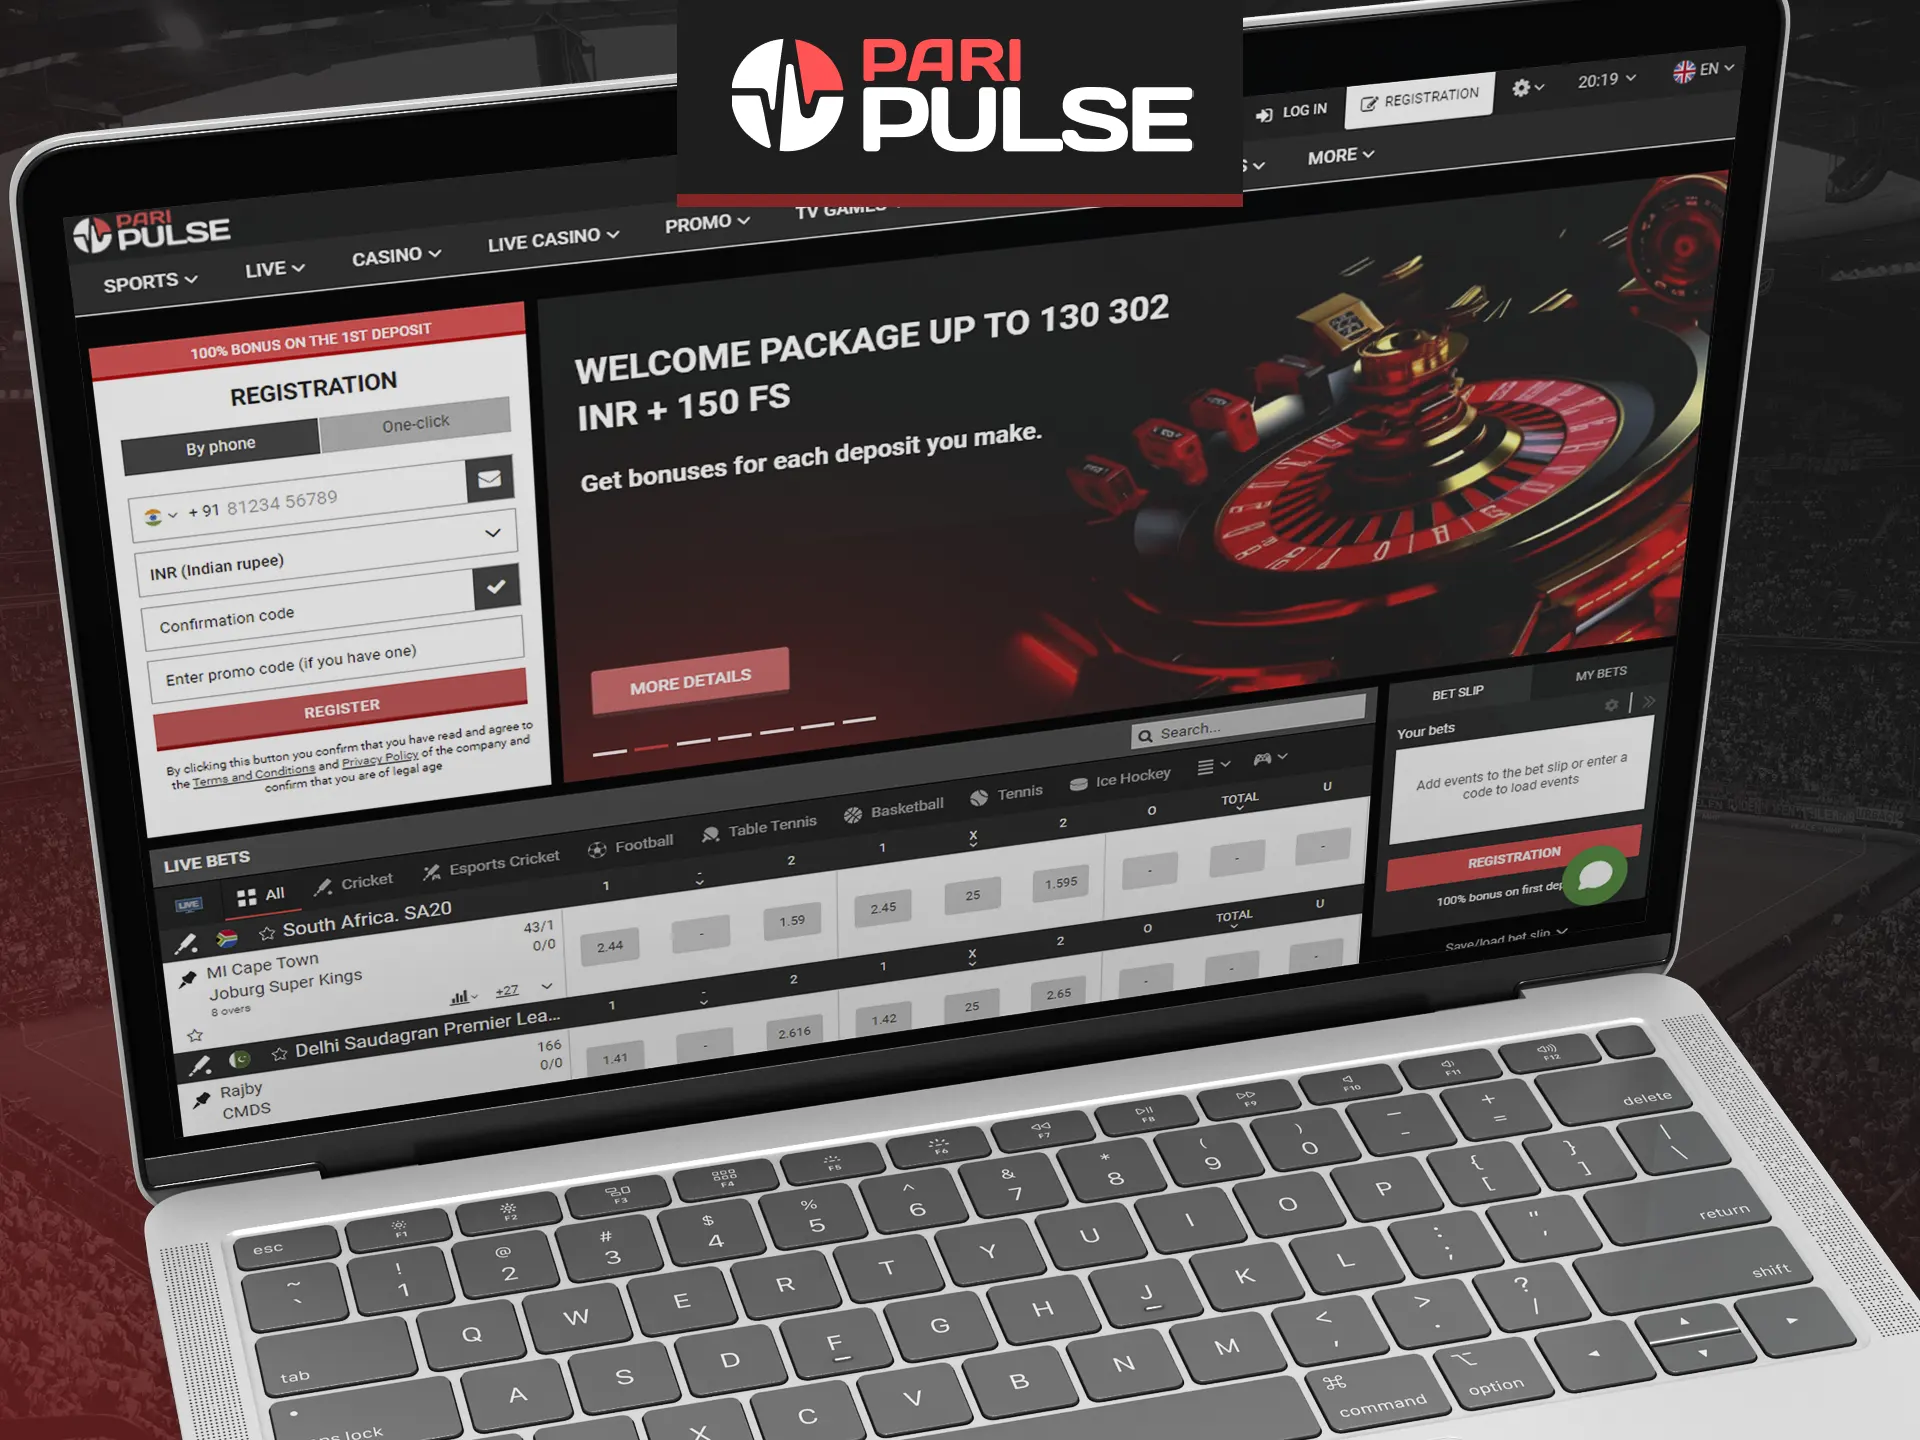 Play casino online with PariPulse.